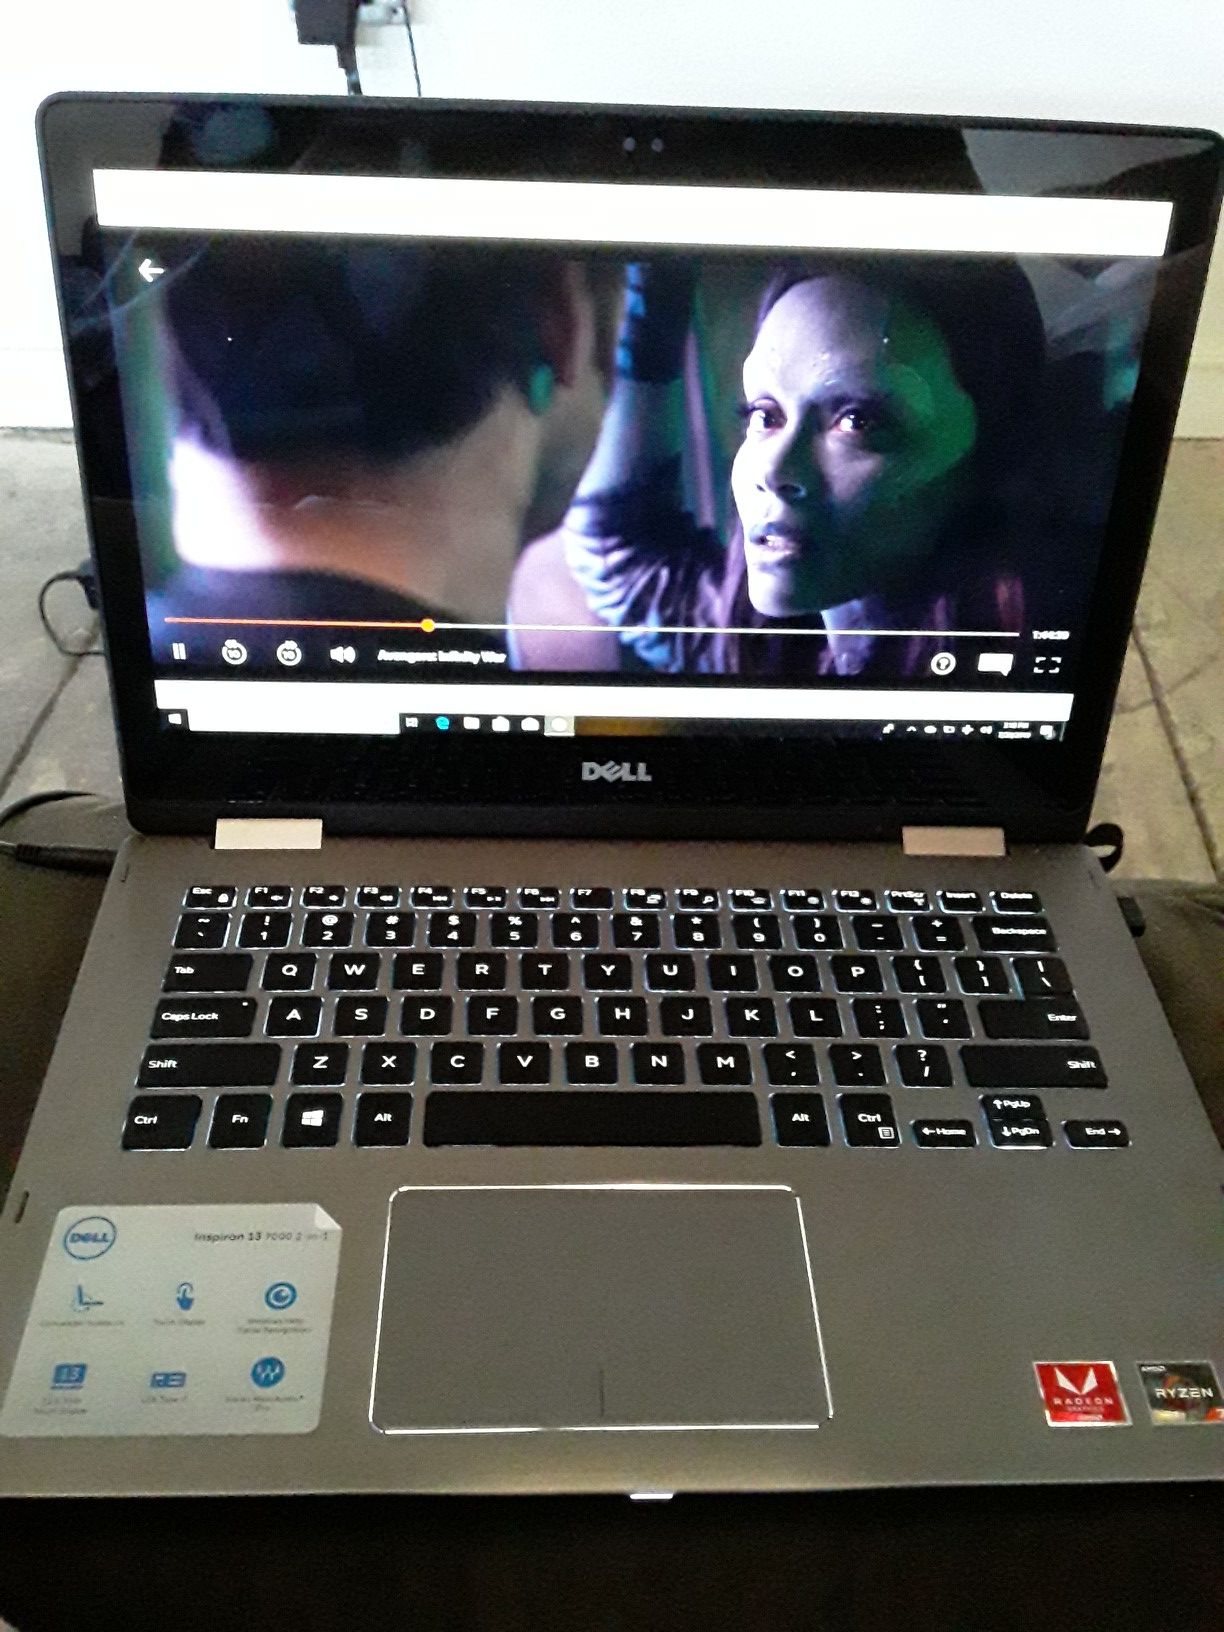 Dell Inspiron 7000 I3 2 in 1 Touch Screen